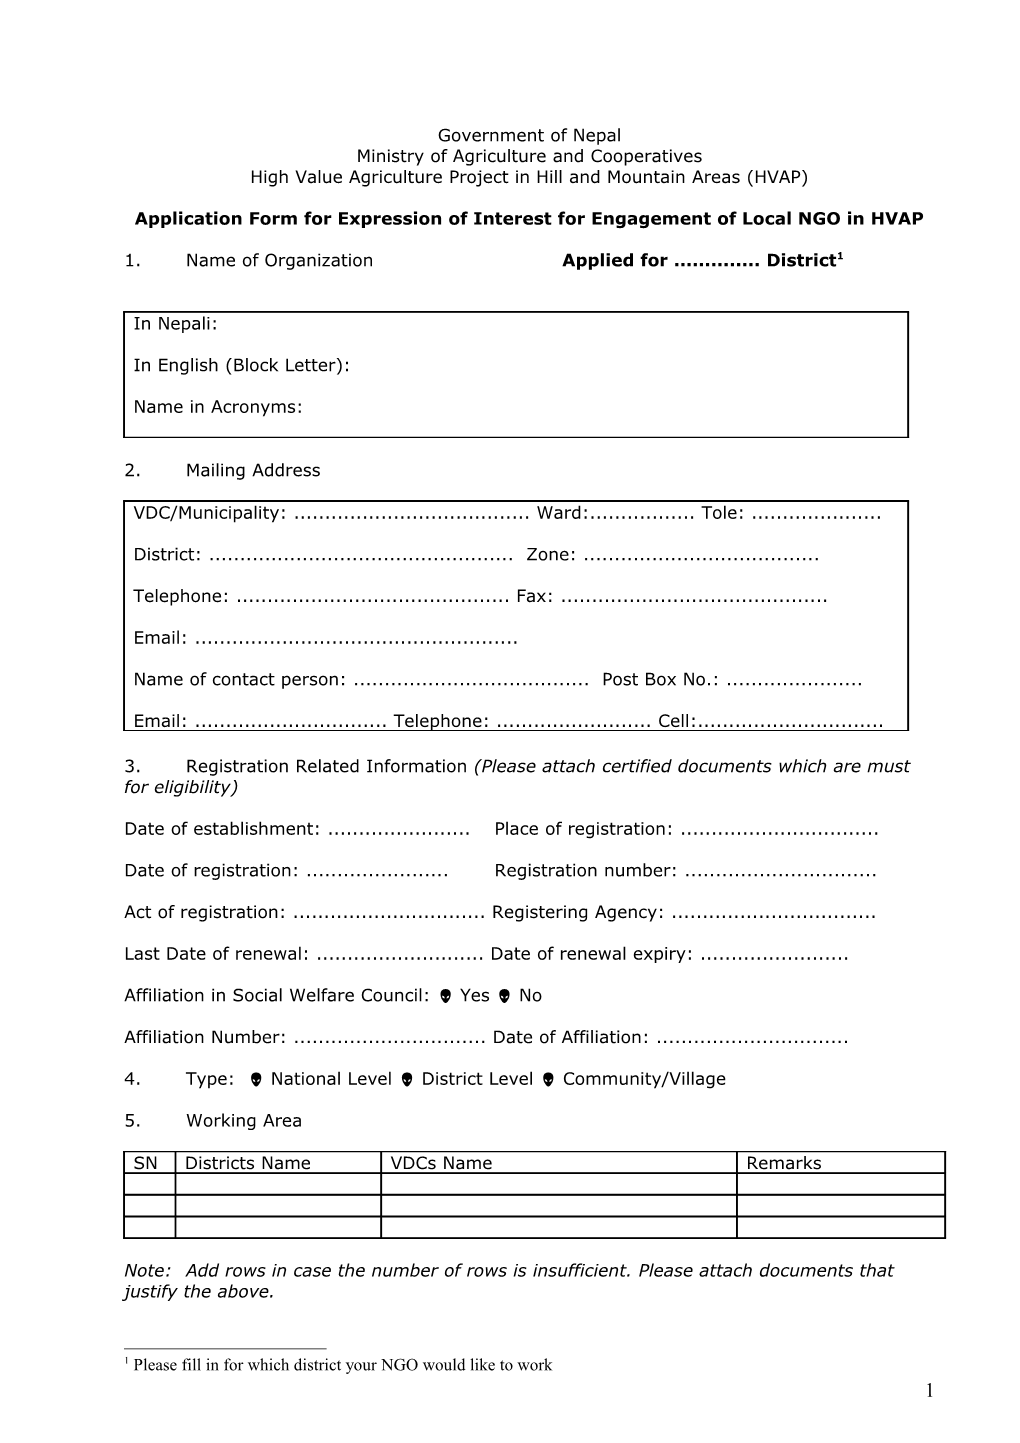 Application Form for Expression of Interest for Engagement of Local NGO in HVAP